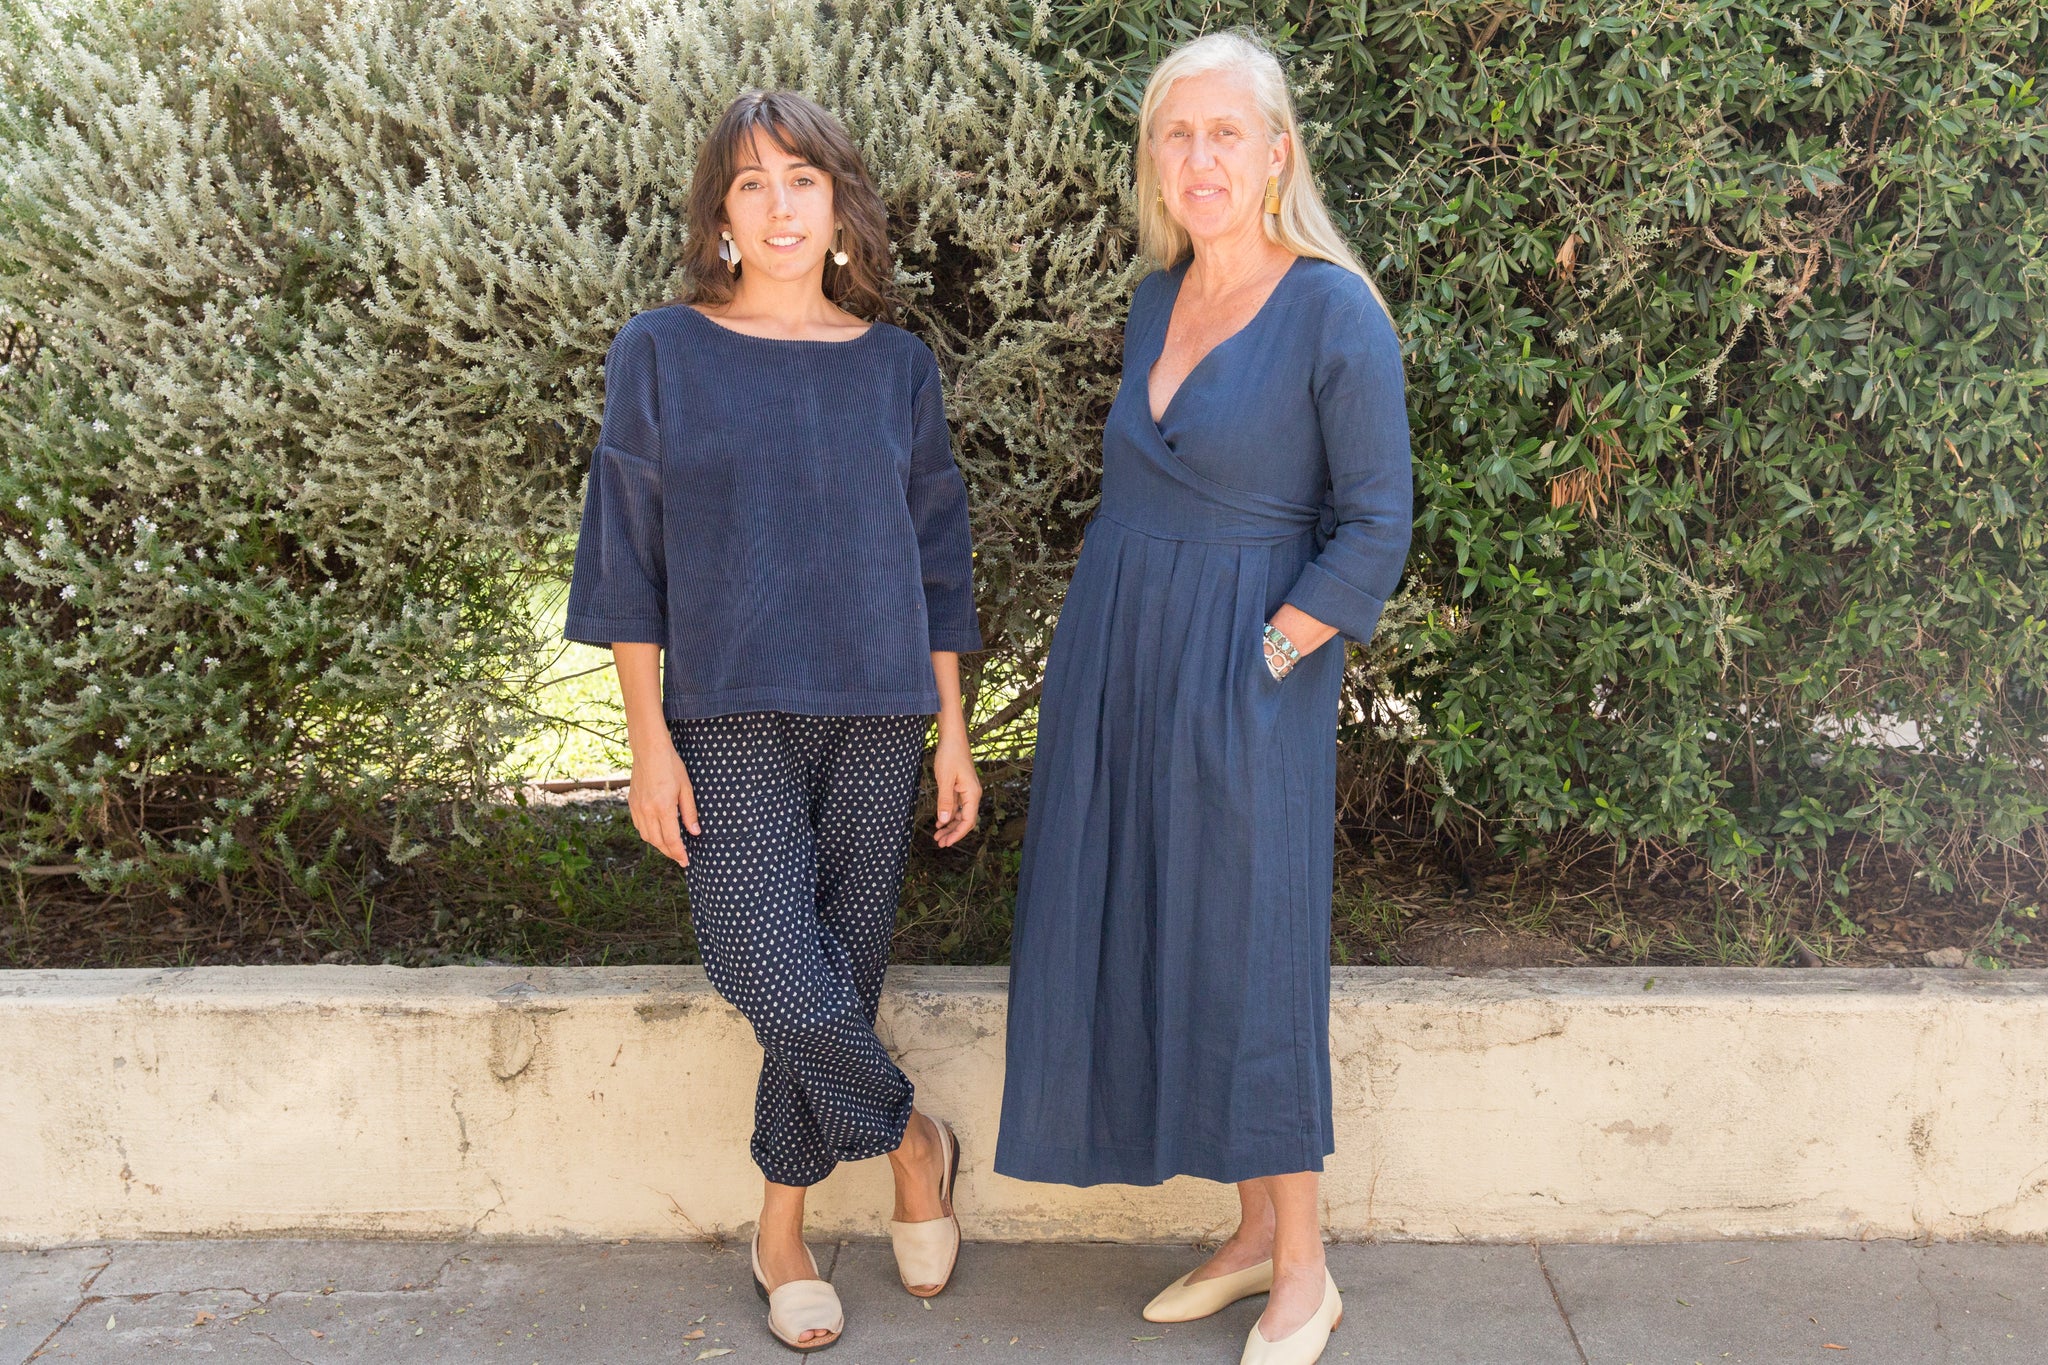 owners of Dotter, Susanne McLean and Annika Huston, standing in front of bushes